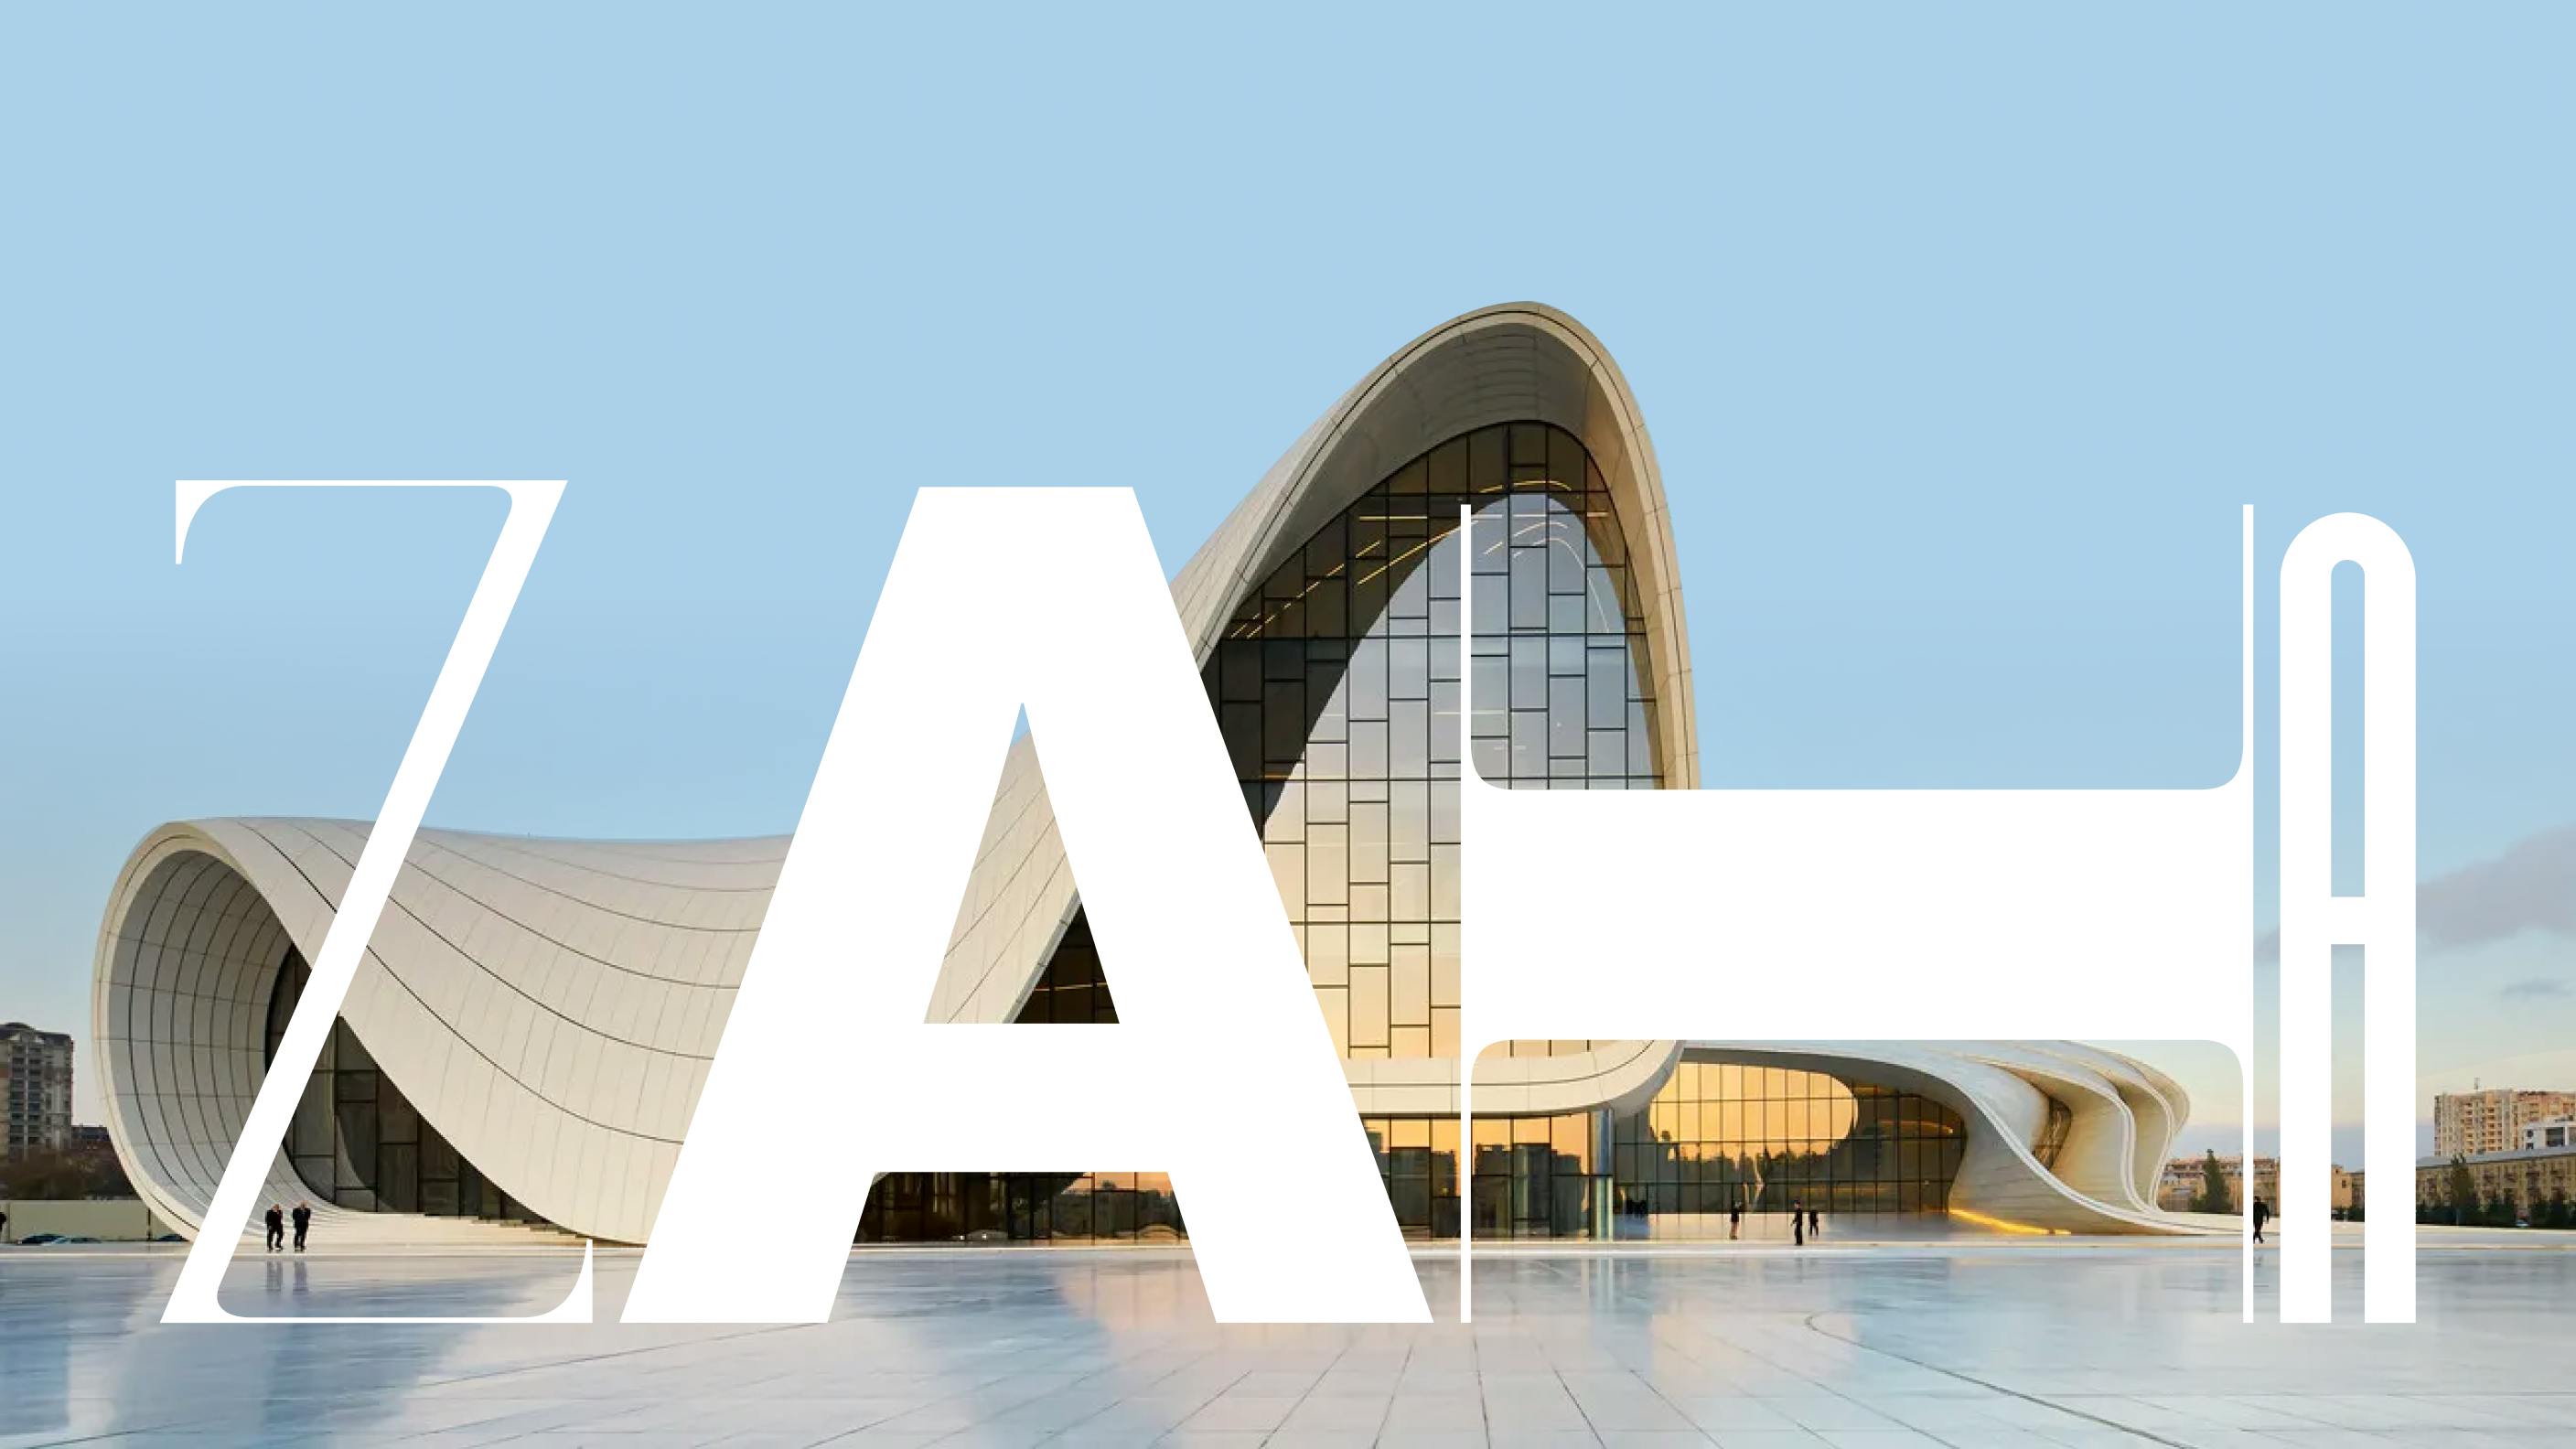 The Heydar Aliyev Centre building by Zaha Hadid with the name Zaha superposed onto it